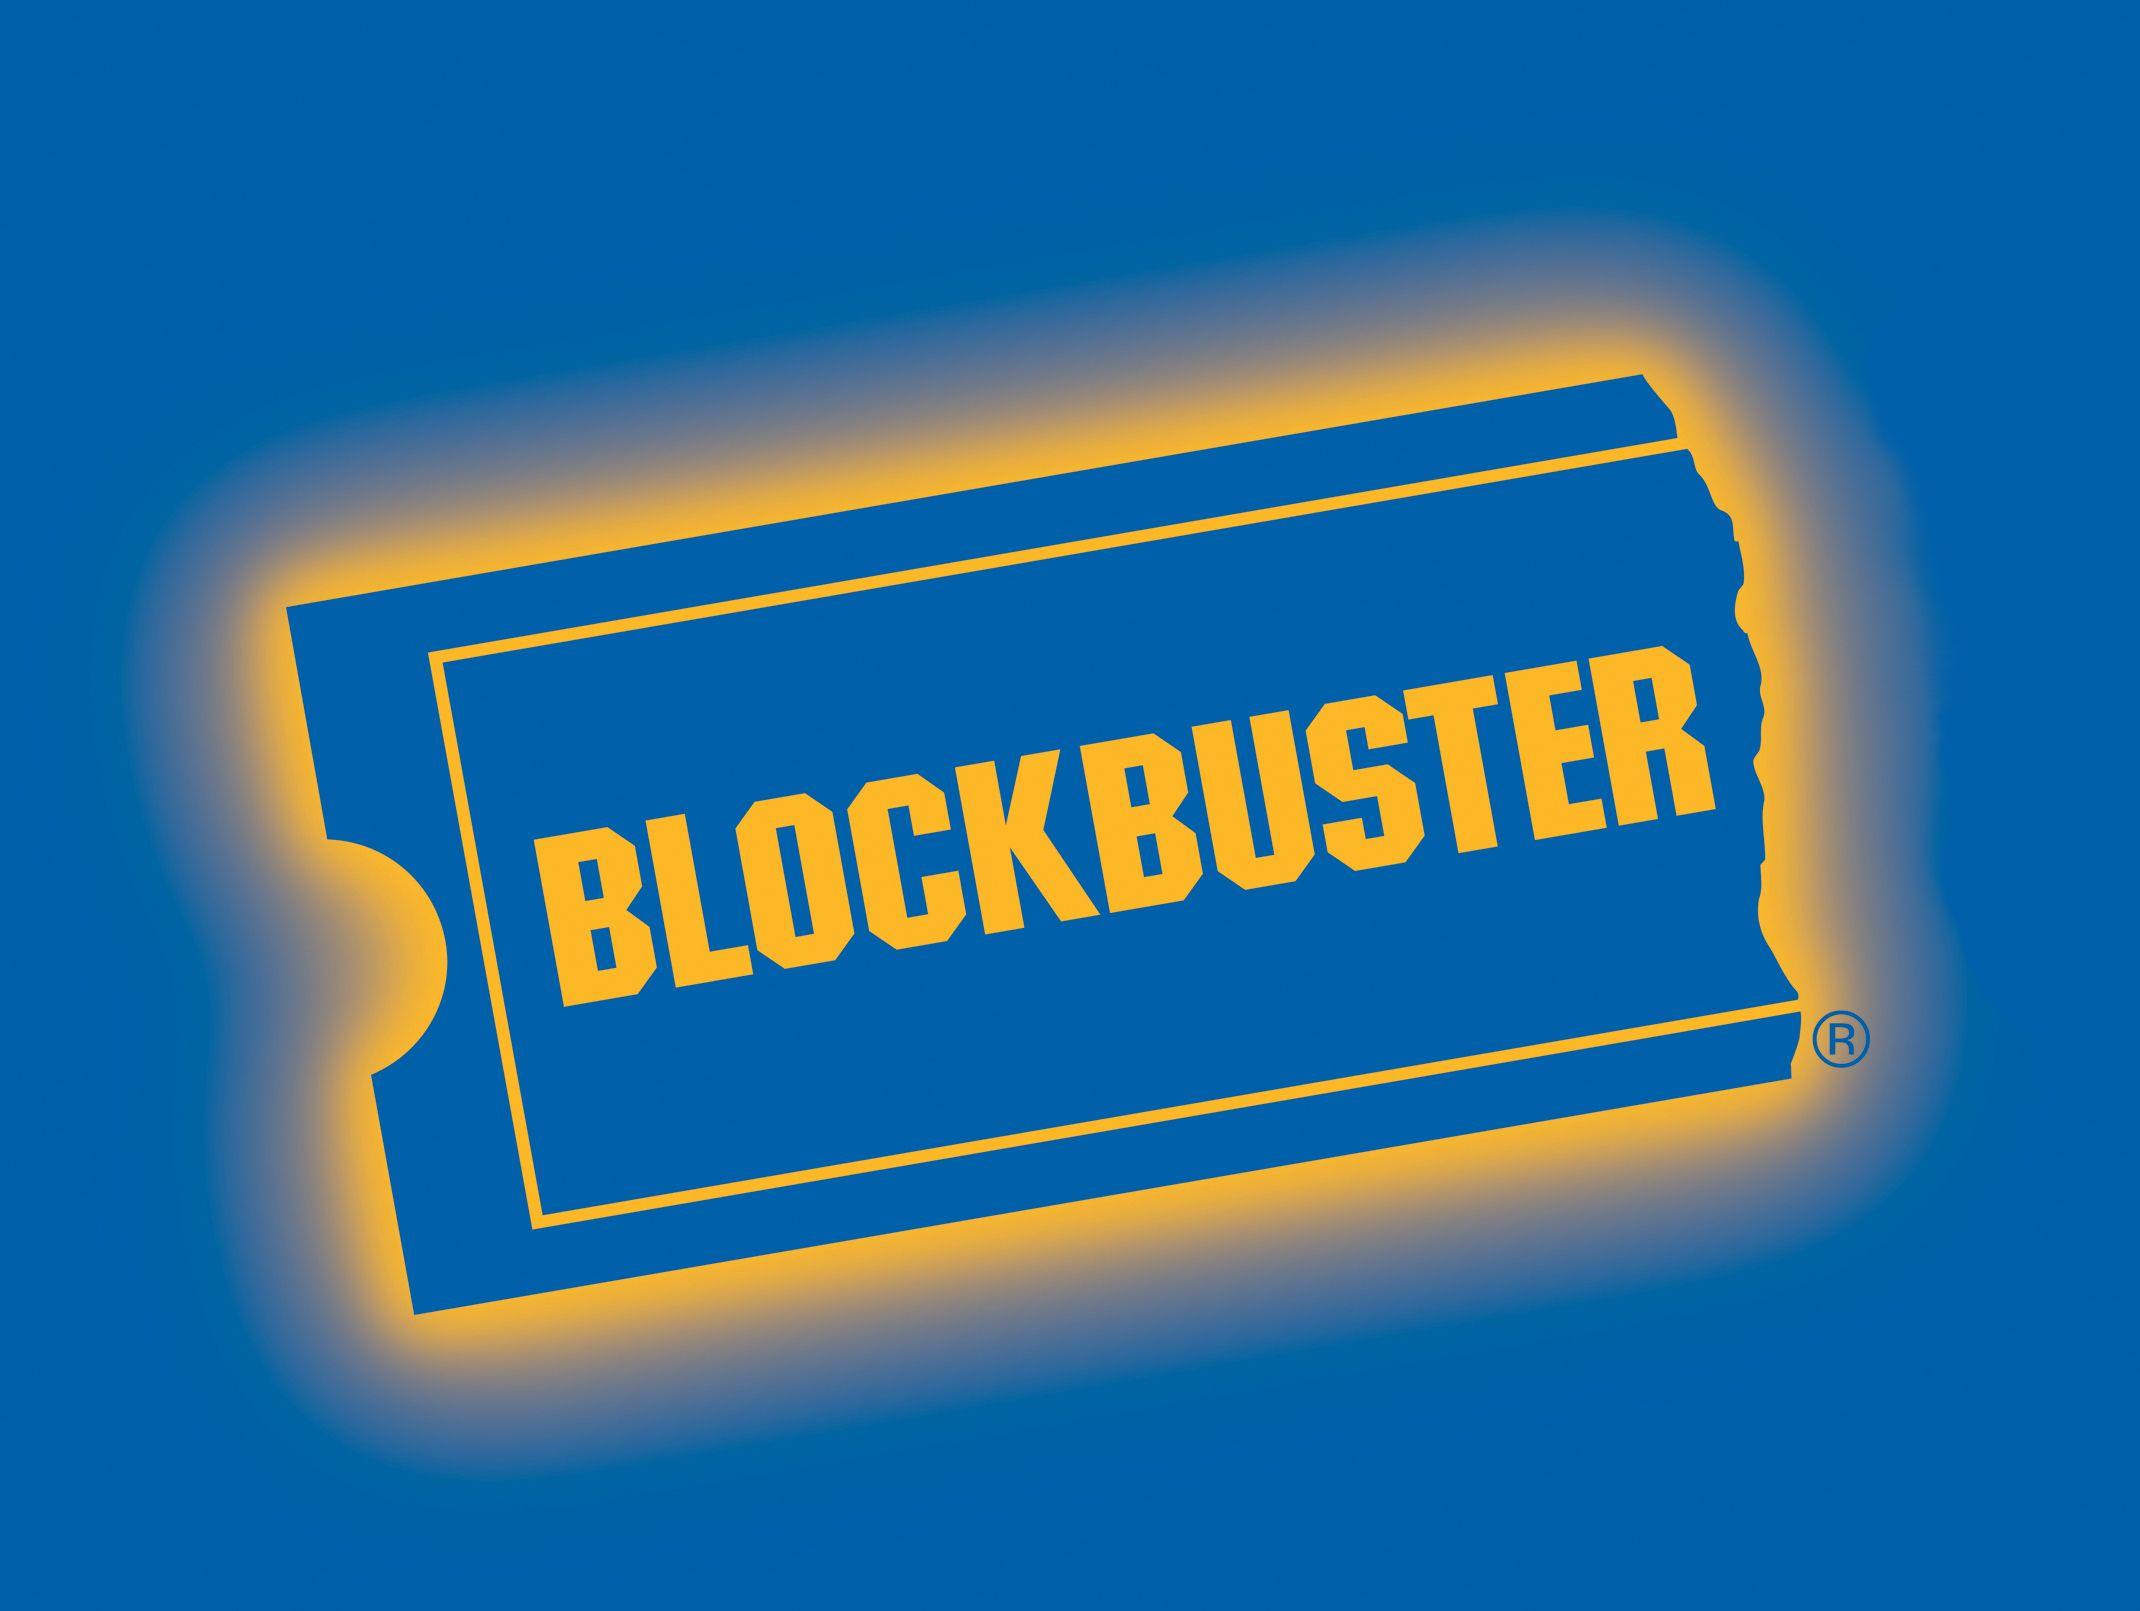 Blockbusters Logo - Samsung inks film streaming deal with Blockbuster